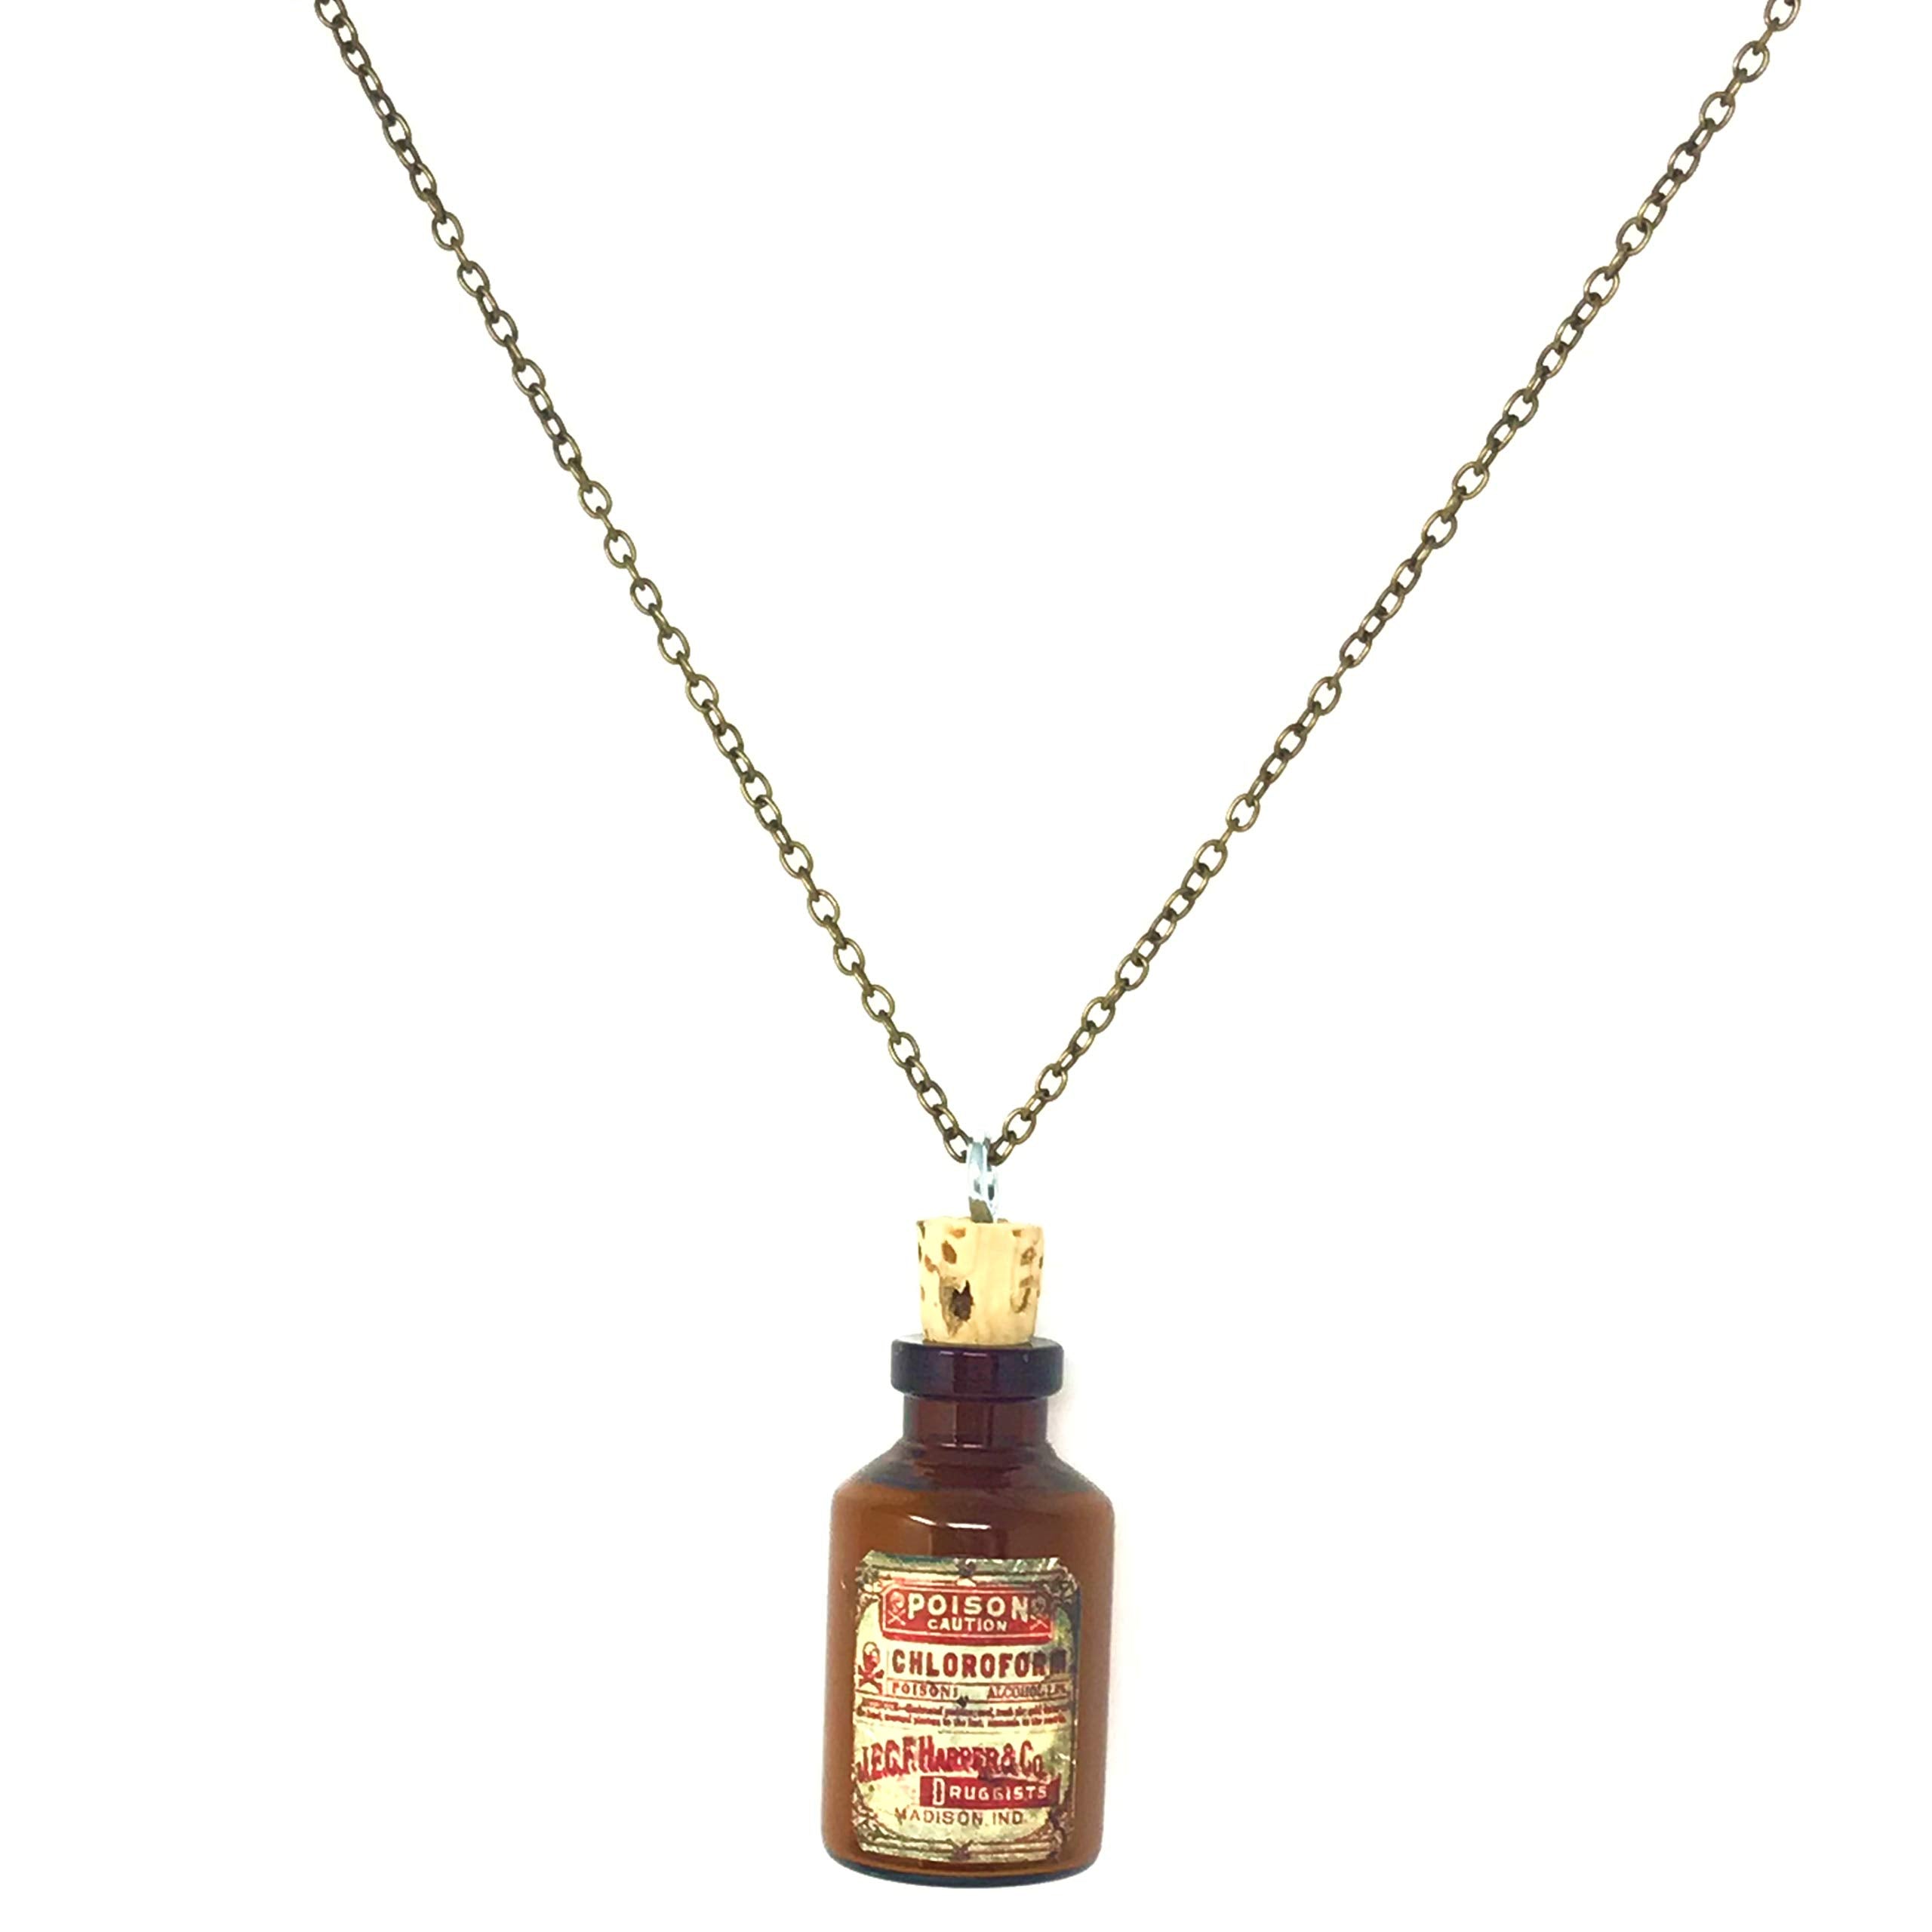 Apothecary potion necklace